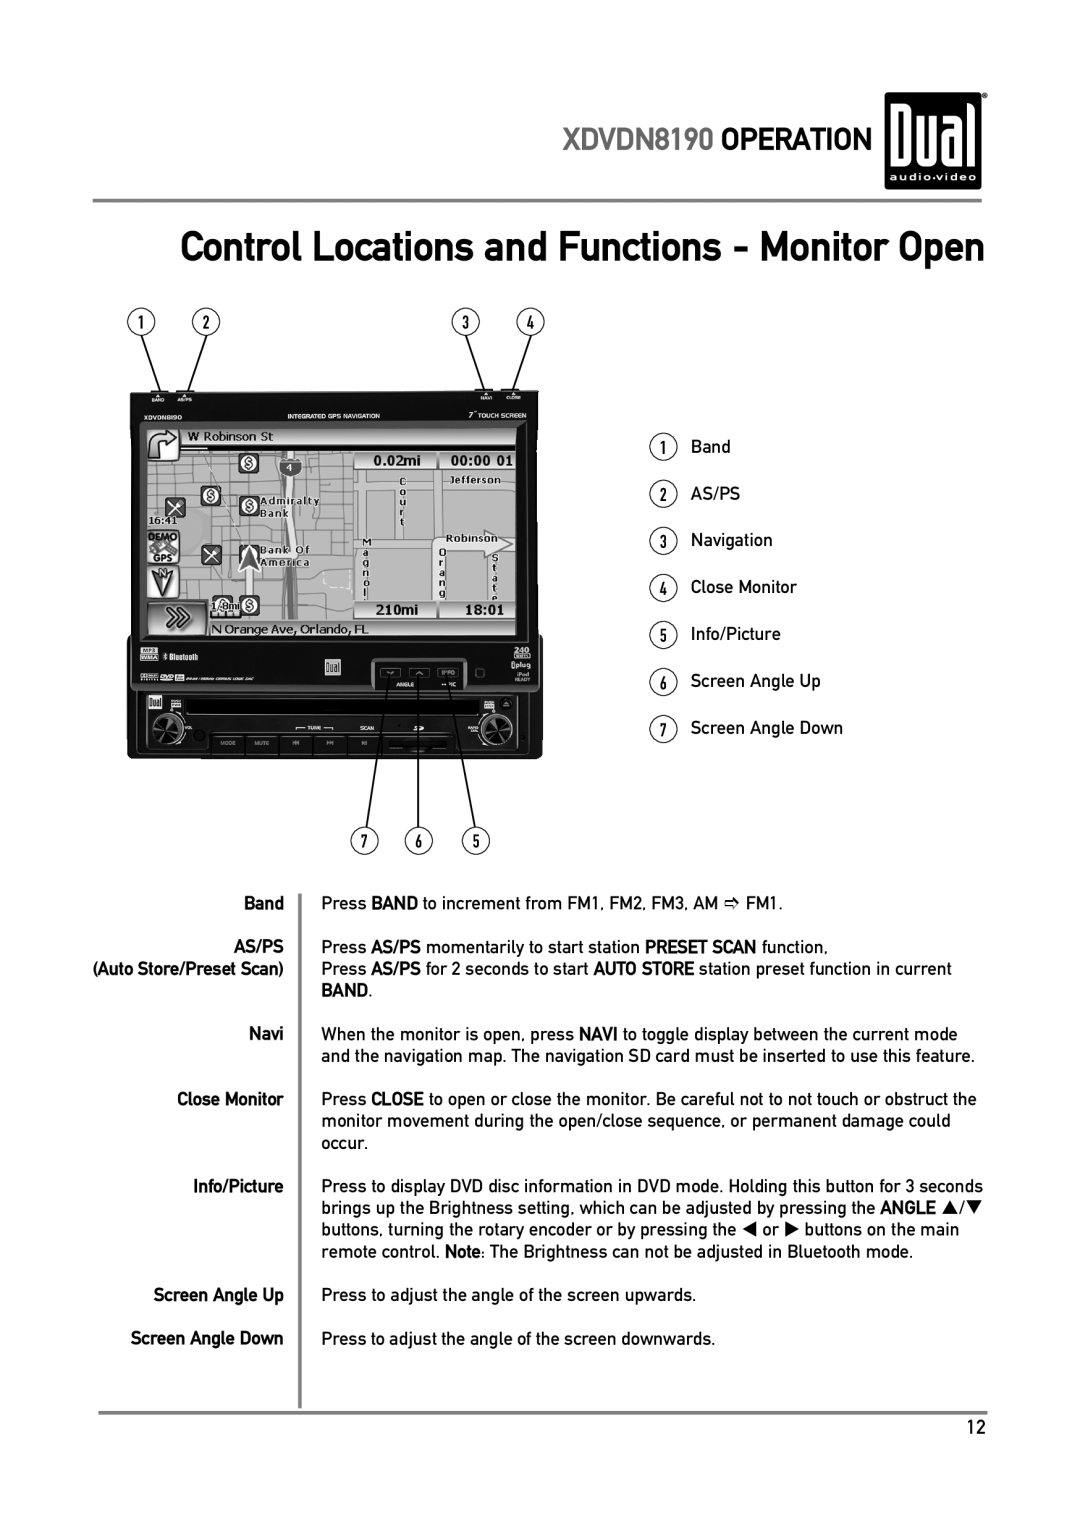 Dual owner manual Control Locations and Functions - Monitor Open, XDVDN8190 OPERATION, Band, Screen Angle Down 